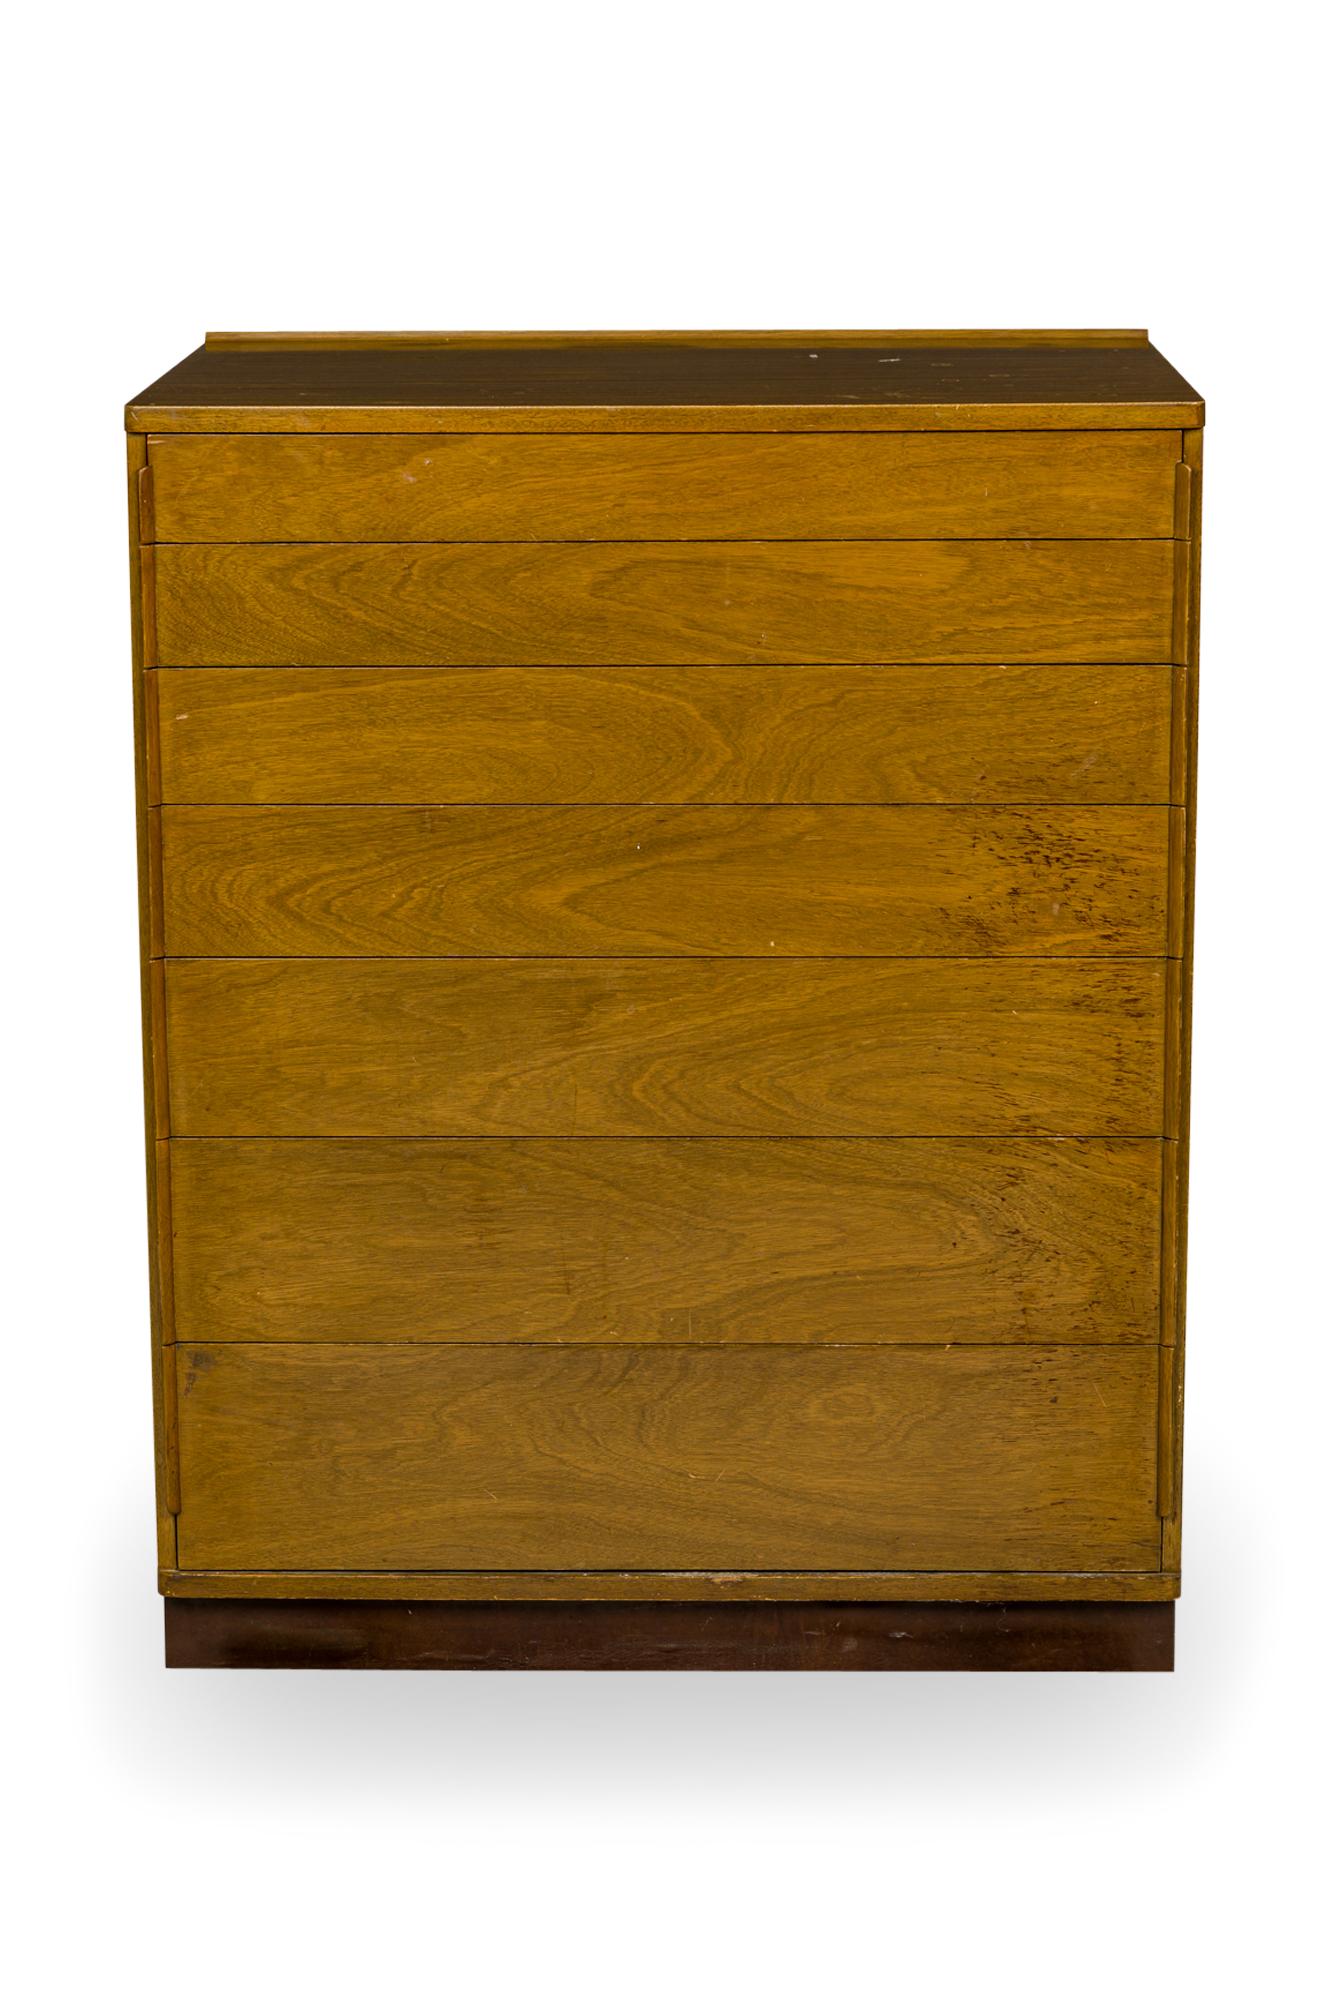 PAIR of American Mid-Century 7-drawer chests with walnut veneer, and drawers in graduating size with thin plywood drawer pulls on the sides of each drawer front, resting on a brown leather-wrapped plinth. (EDWARD WORMLEY FOR DUNBAR FURNITURE